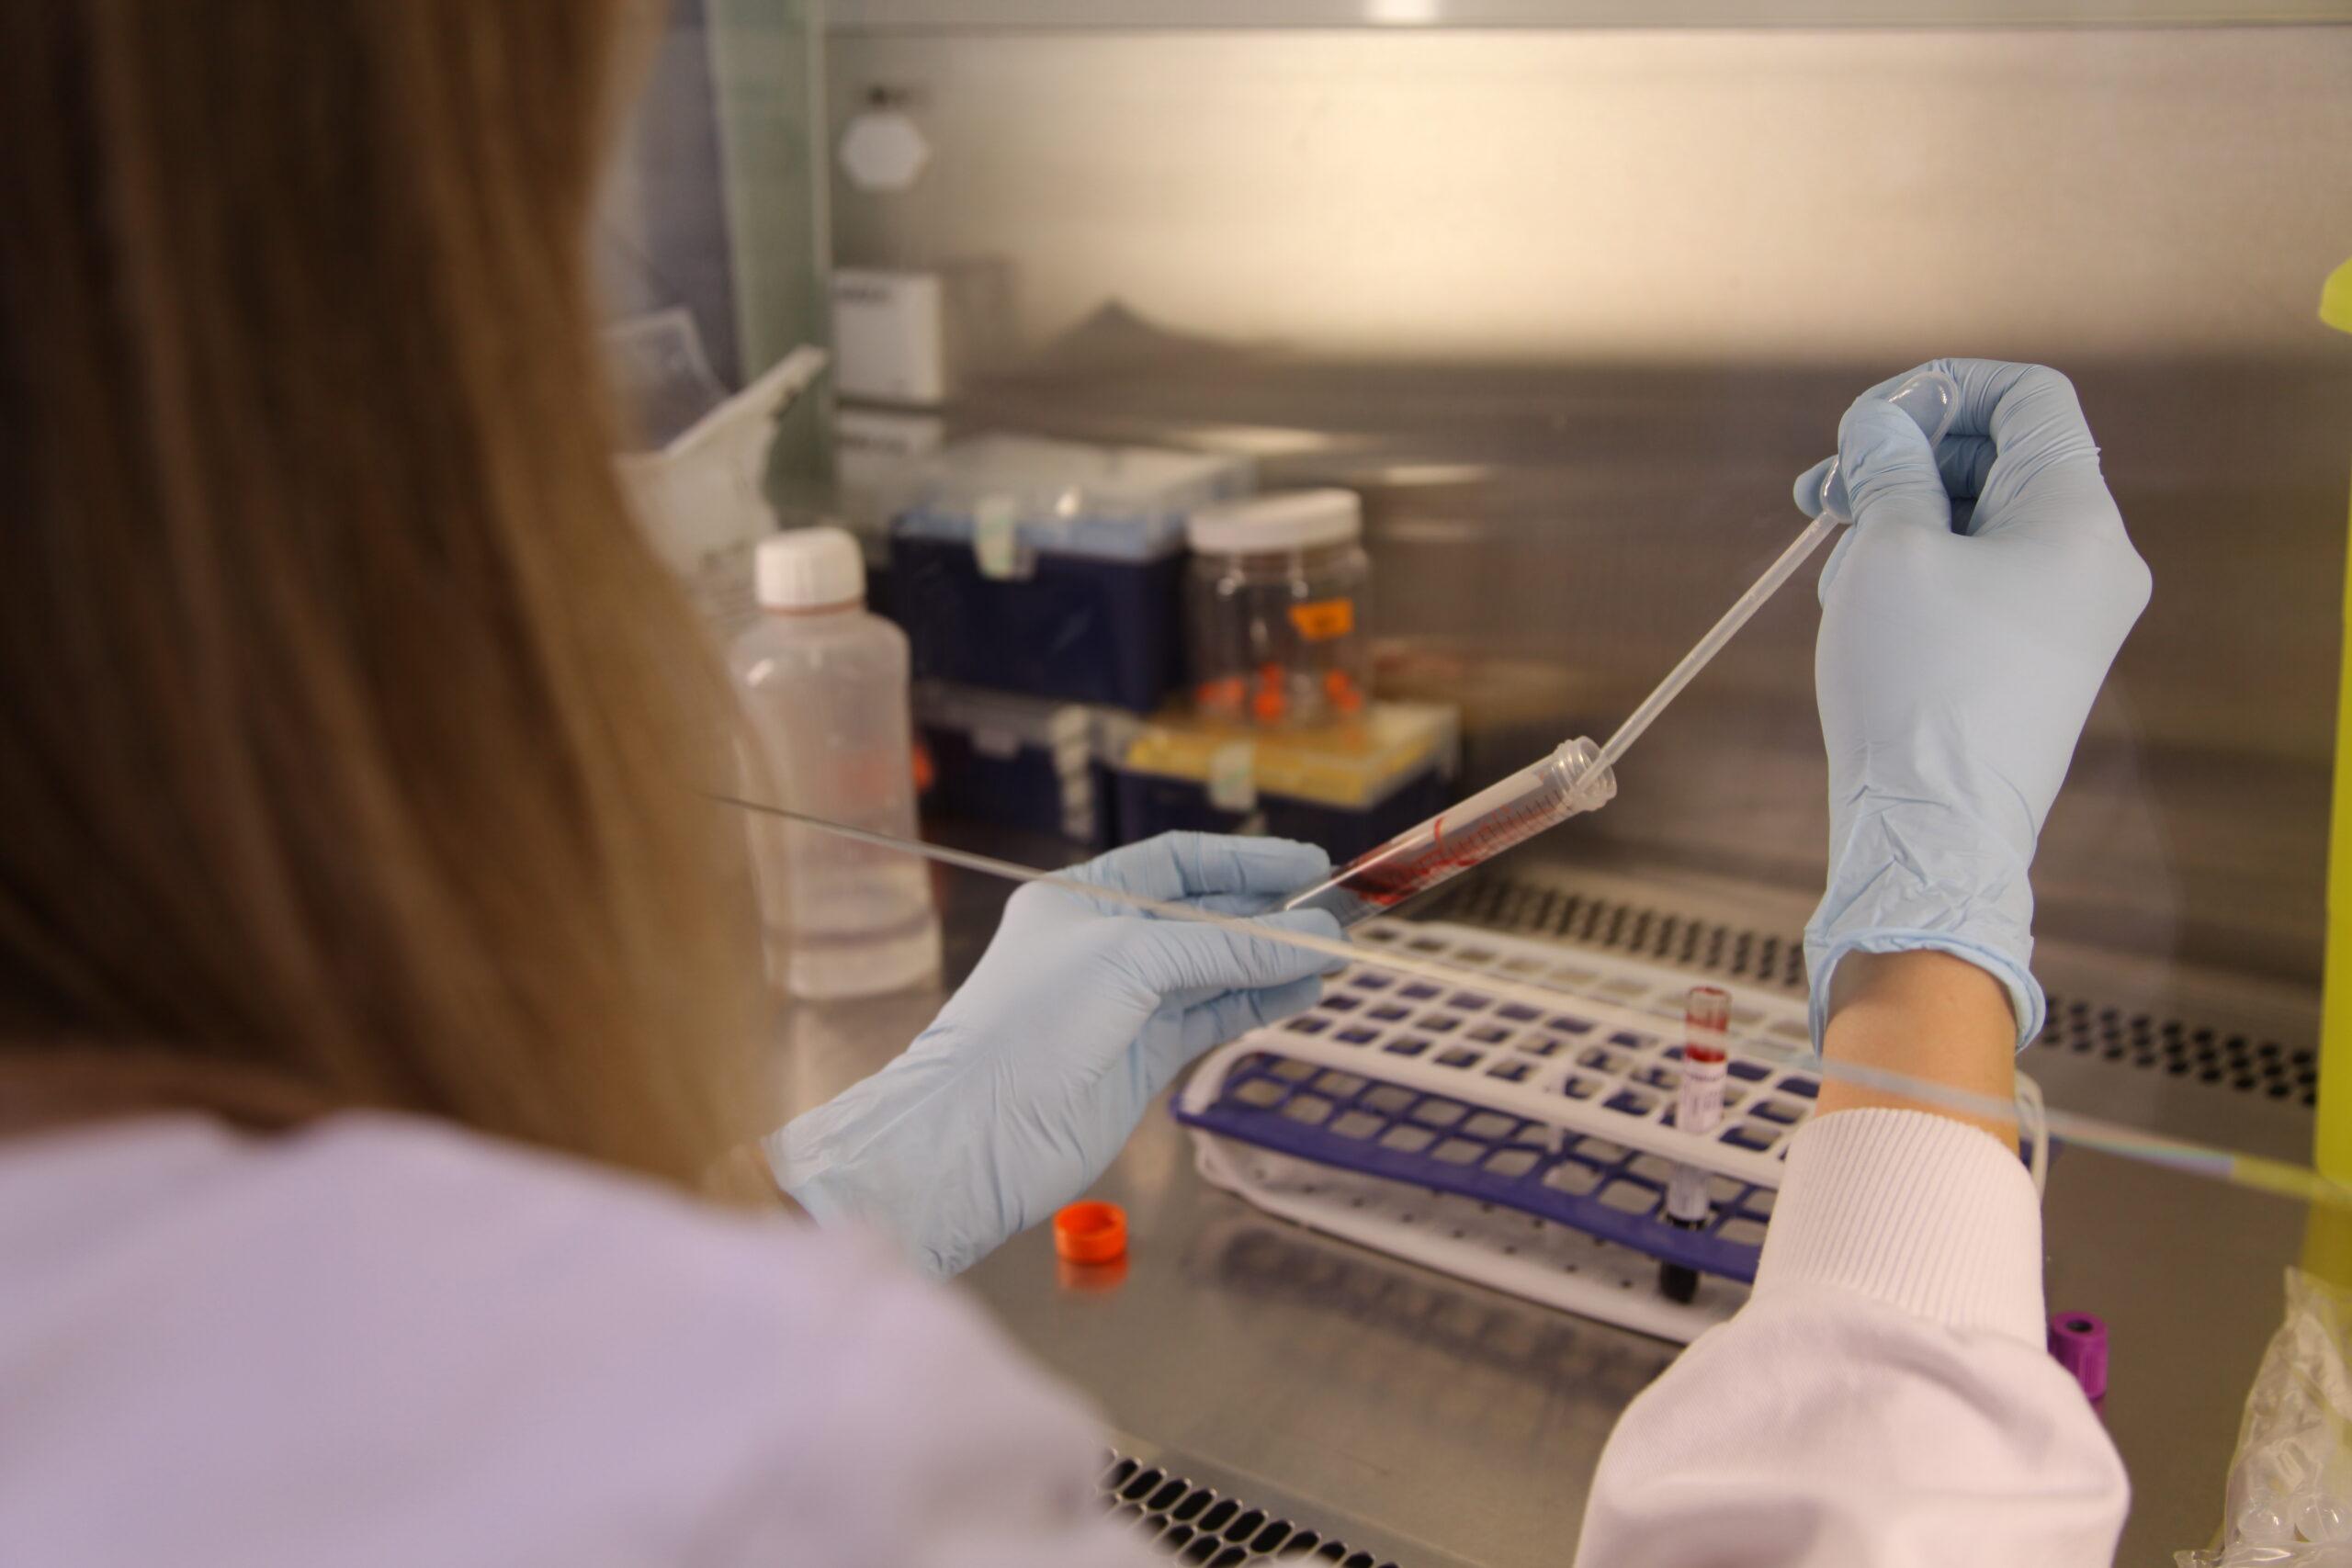 Researcher wearing blue gloves in the laboratory pipetting a blood sample into a test tube.